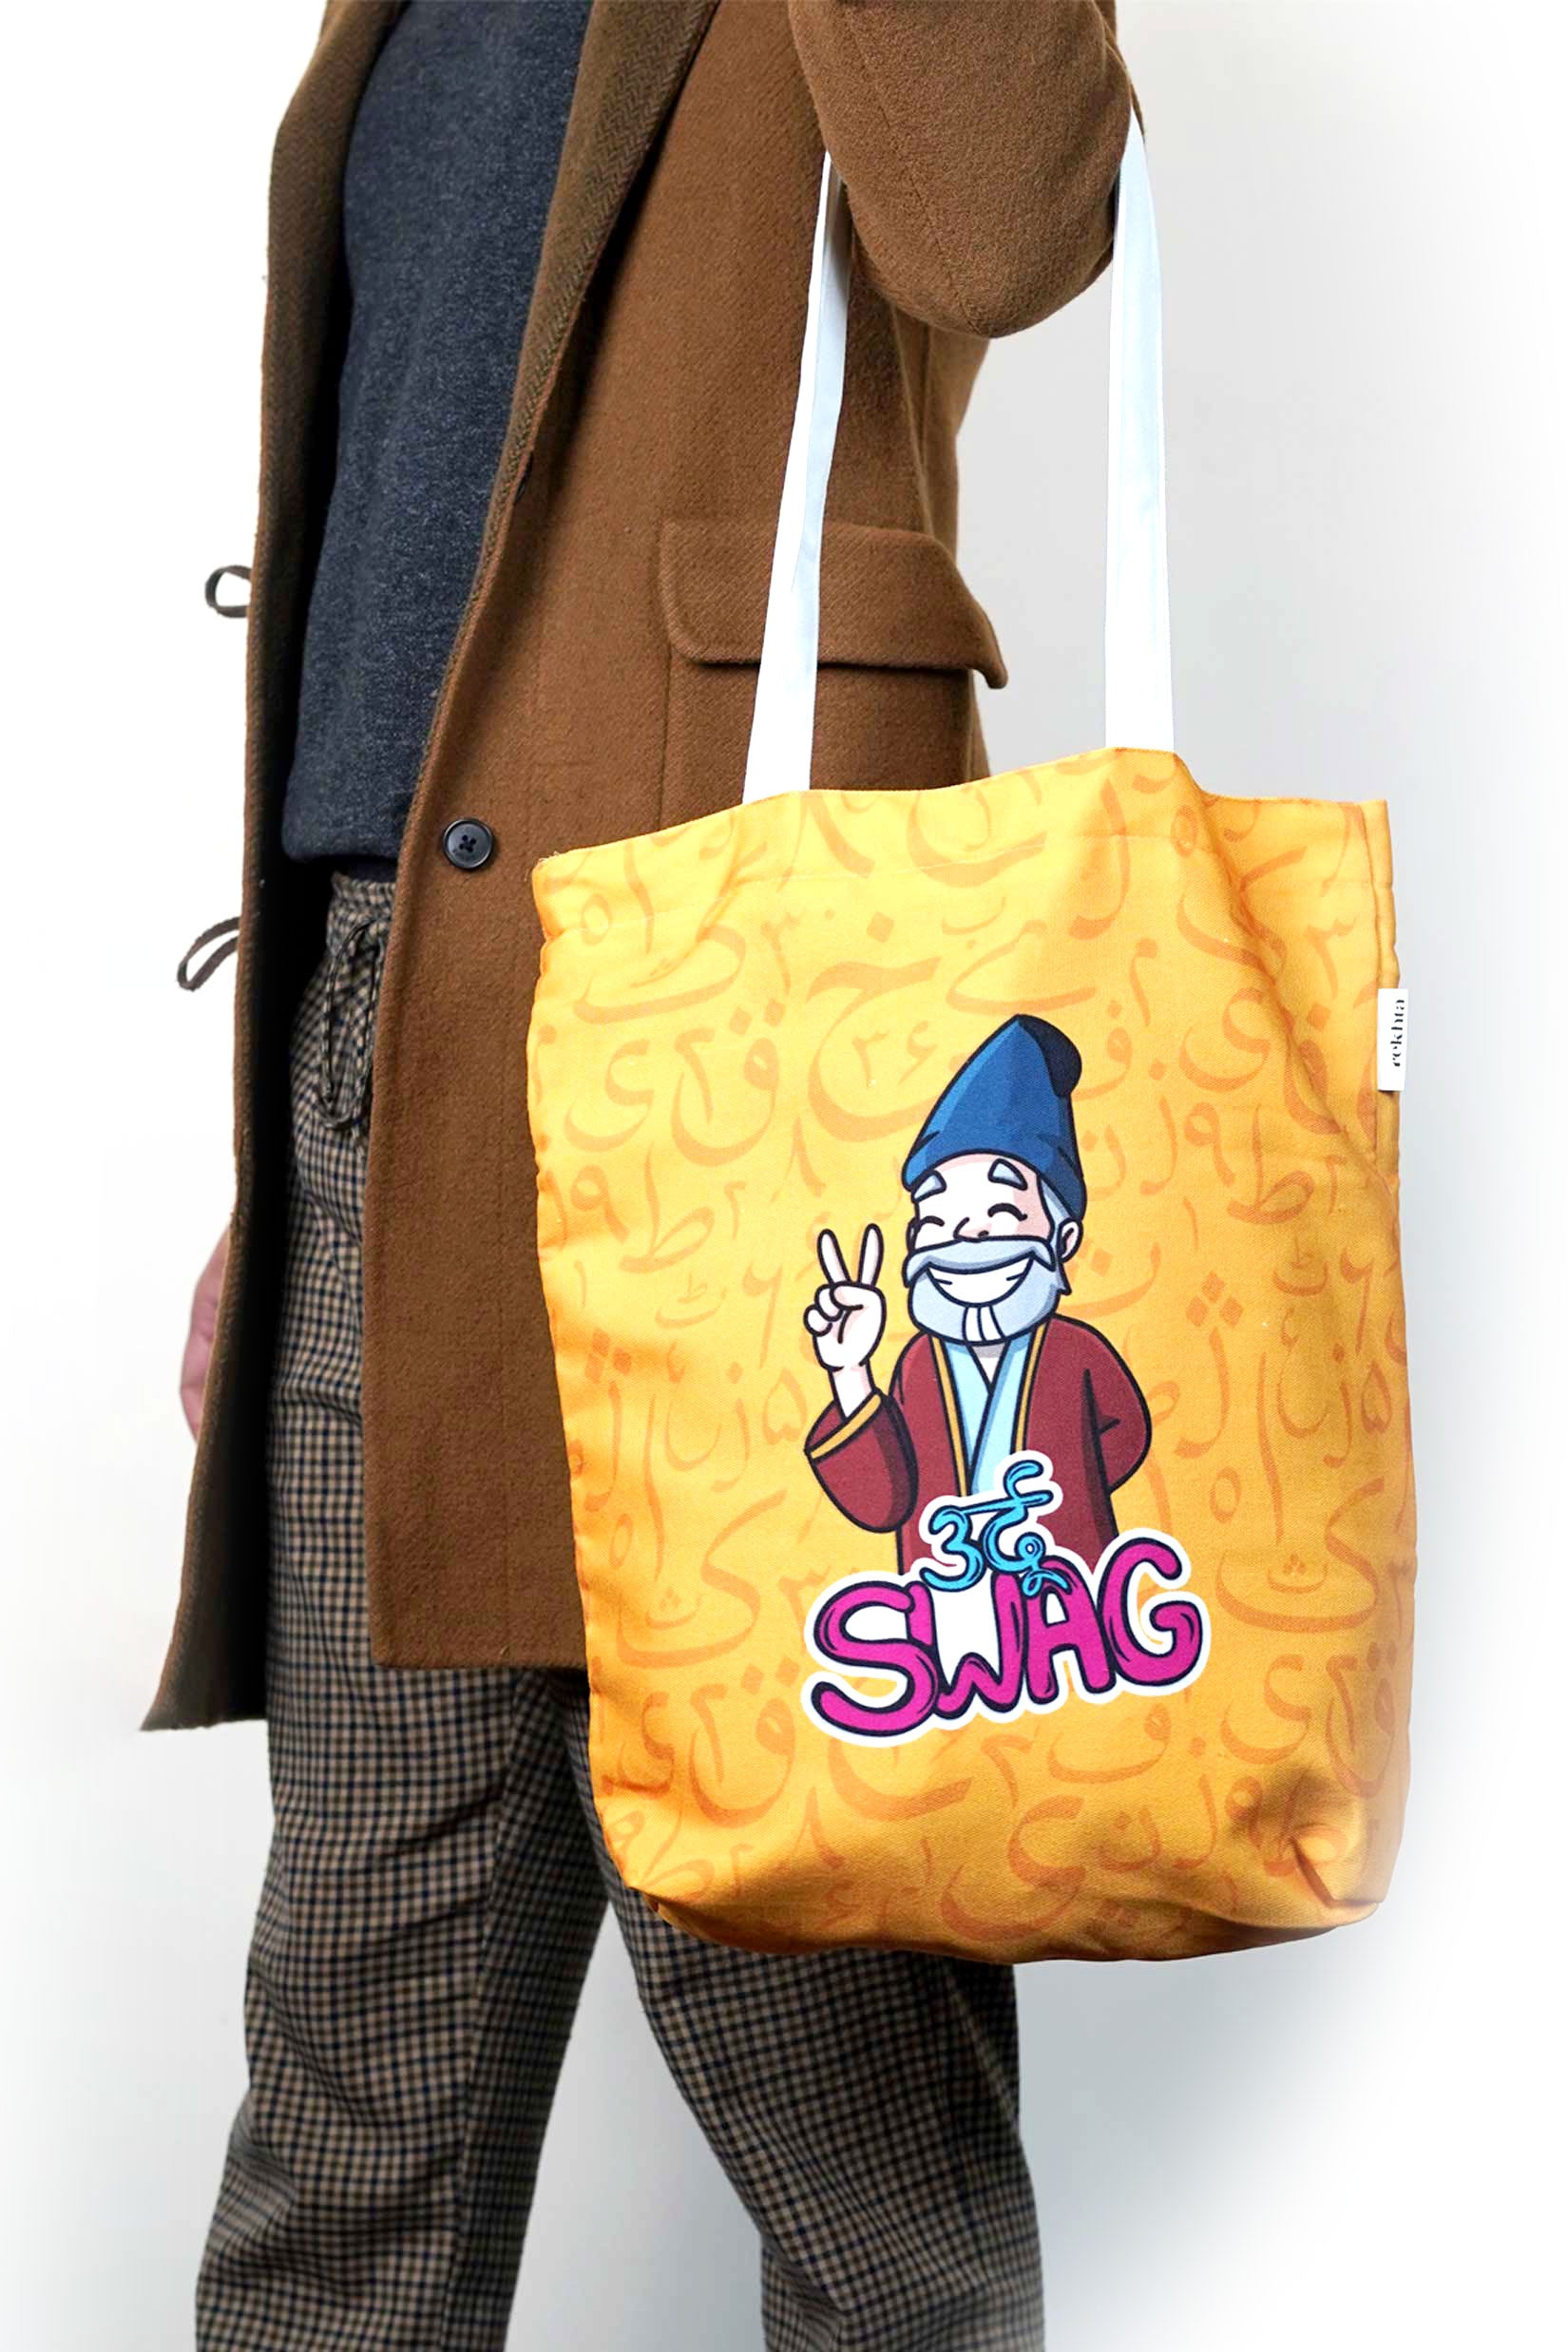 Swag Bags: How to Put Yours Together